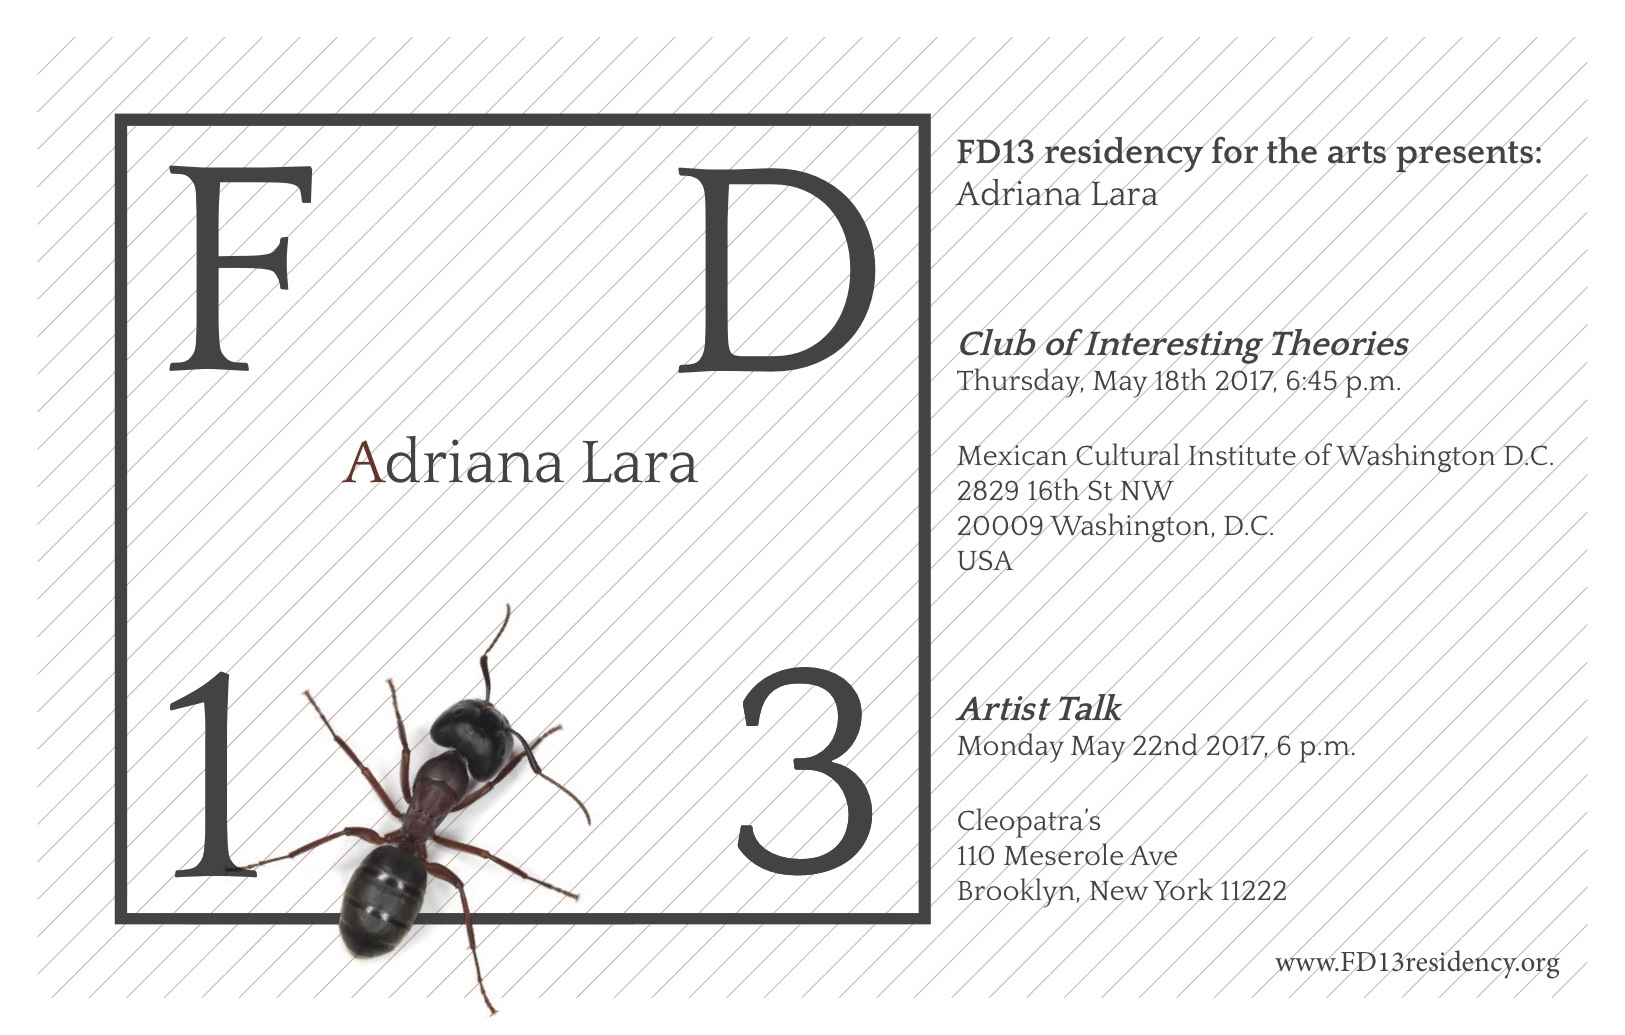 FD13 presents: Adriana Lara. The Club of Interesting Theories. Thursday, 18 May 2017, 6.45 pm, Mexican Cultural Institute of Washington D.C. 